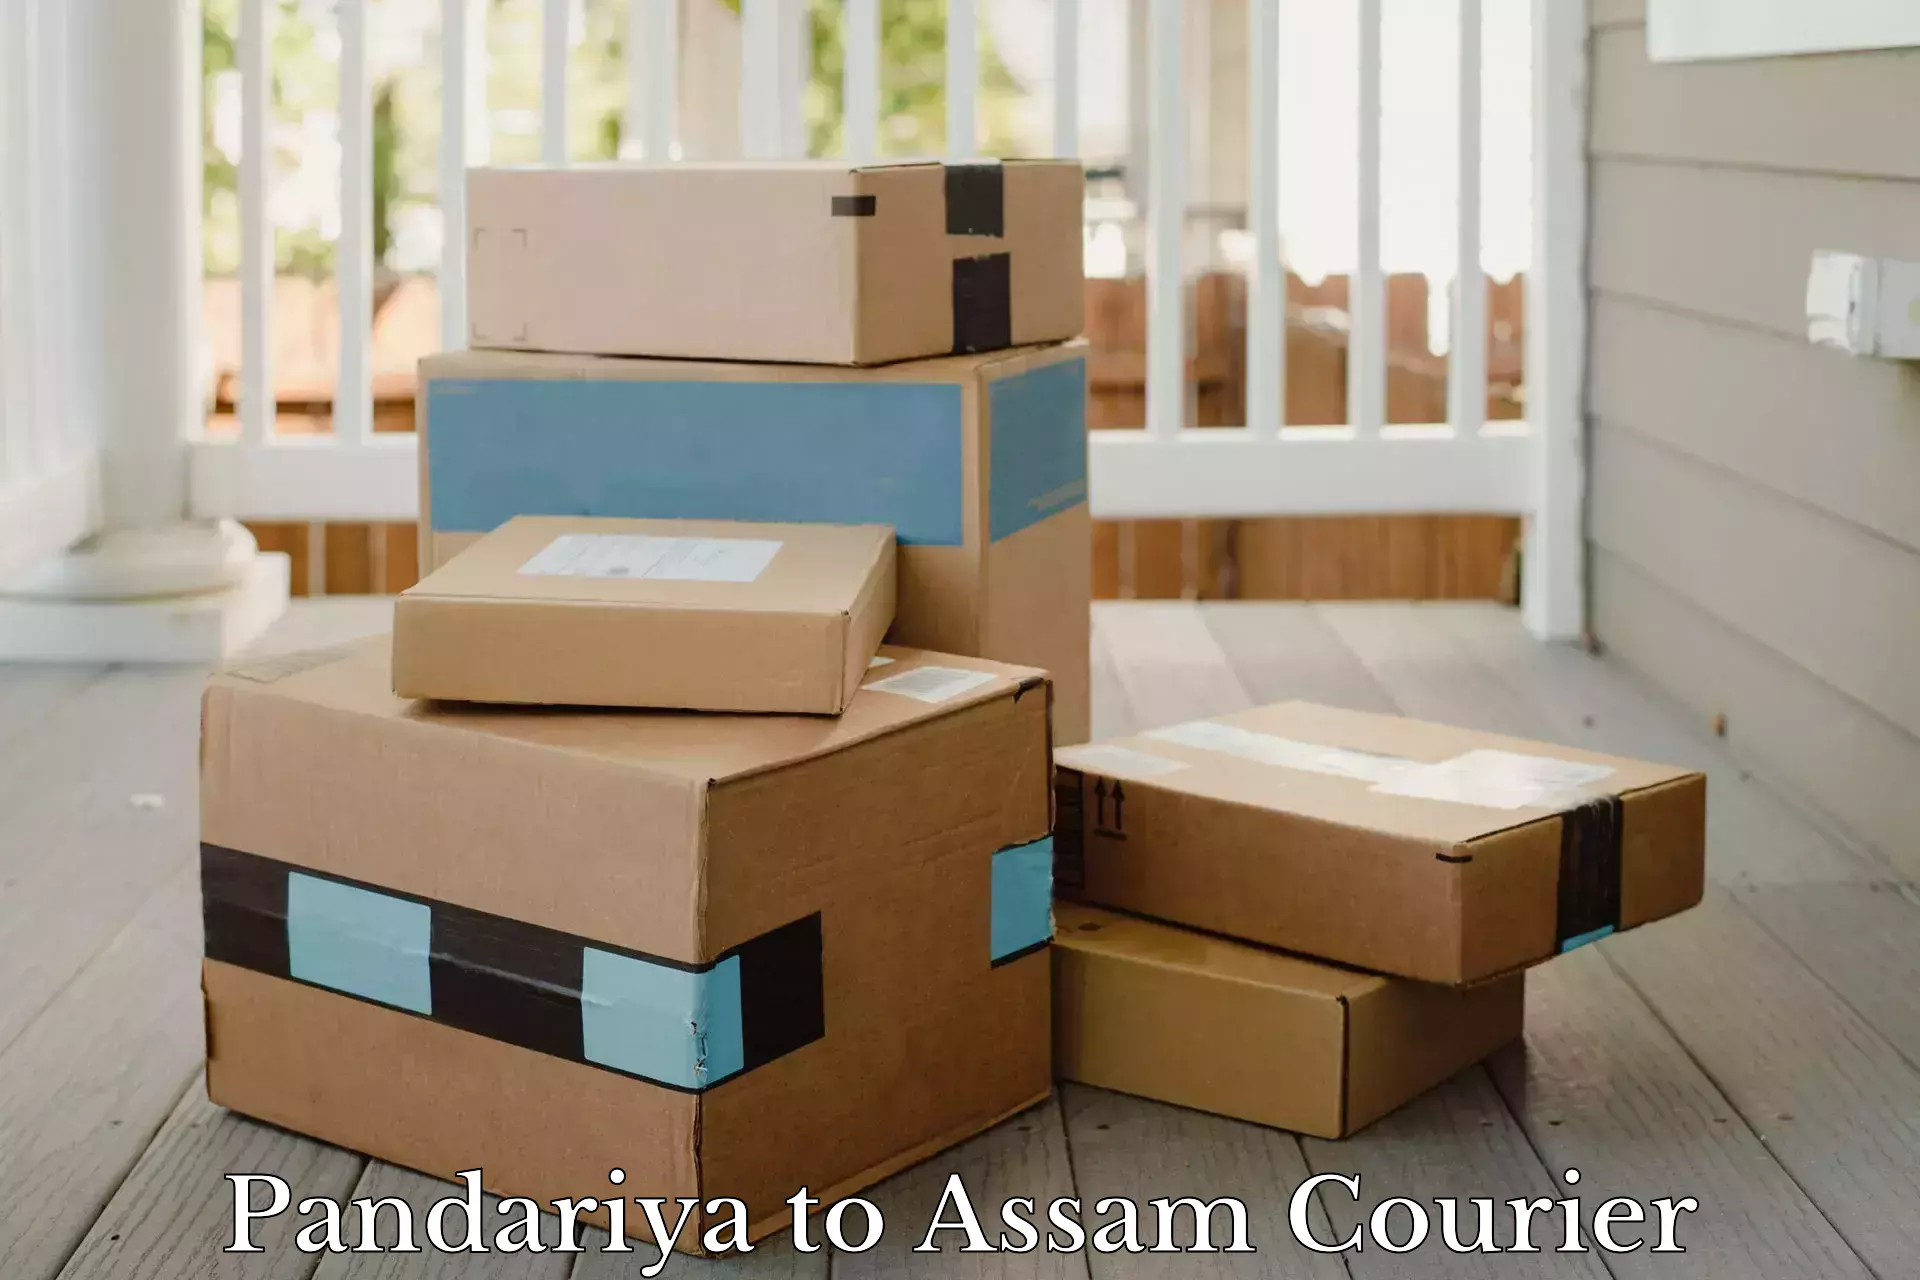 Reliable delivery network Pandariya to Assam